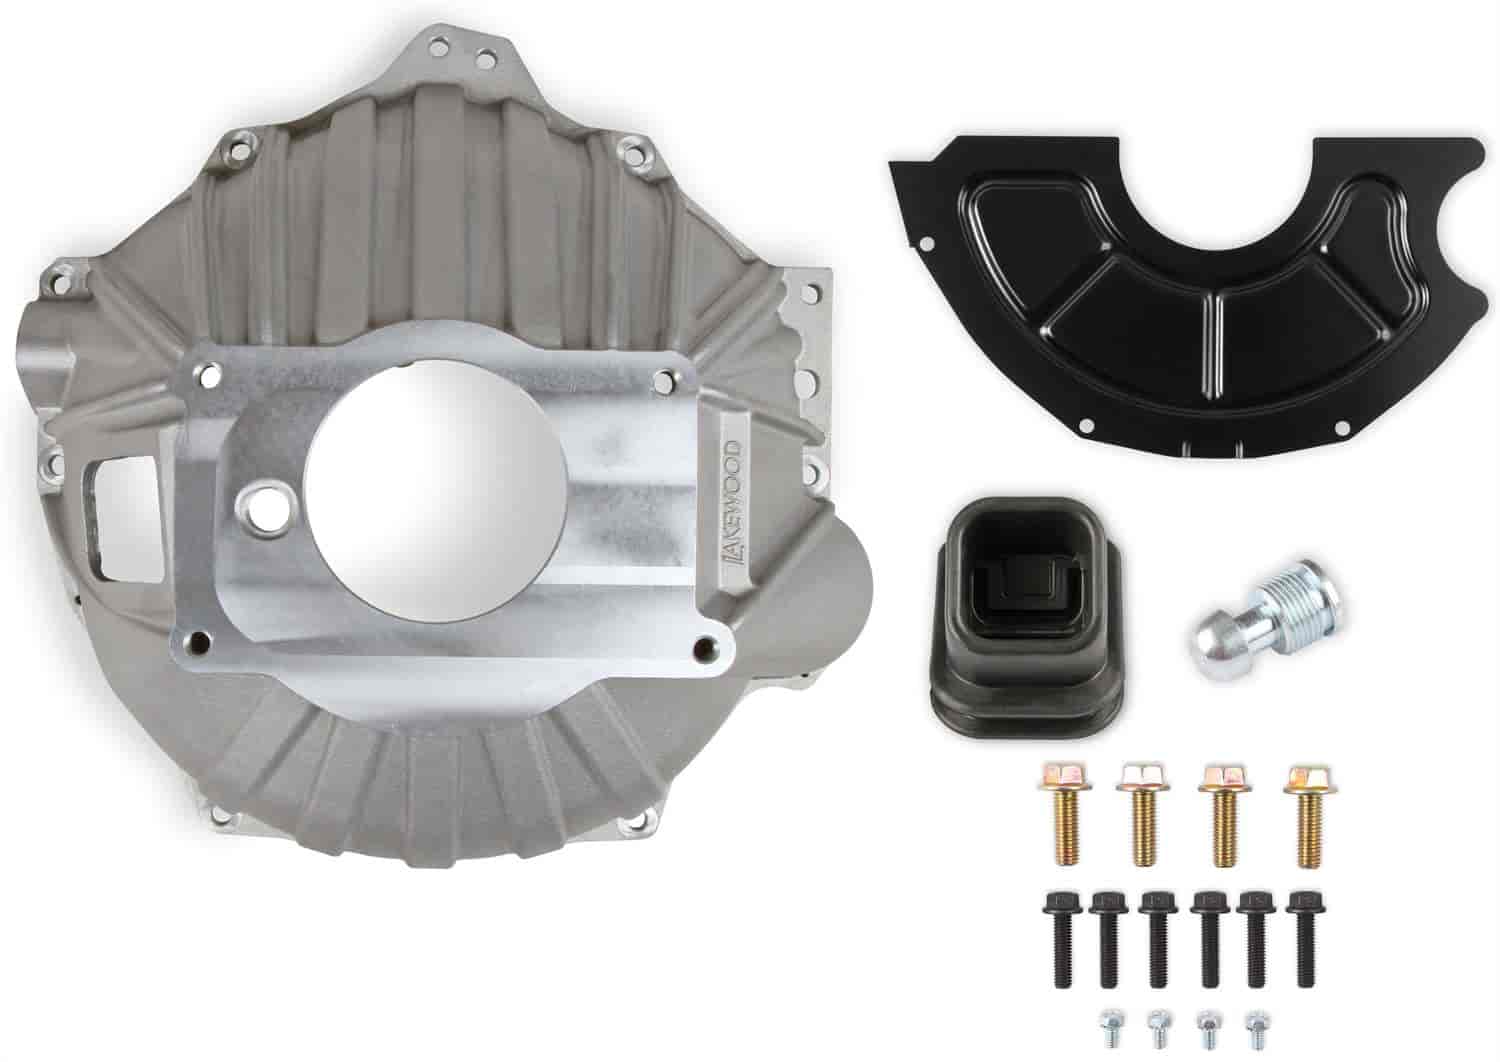 Cast-Aluminum Bellhousing Kit for Small Block Chevy and Big Block Chevy Engines